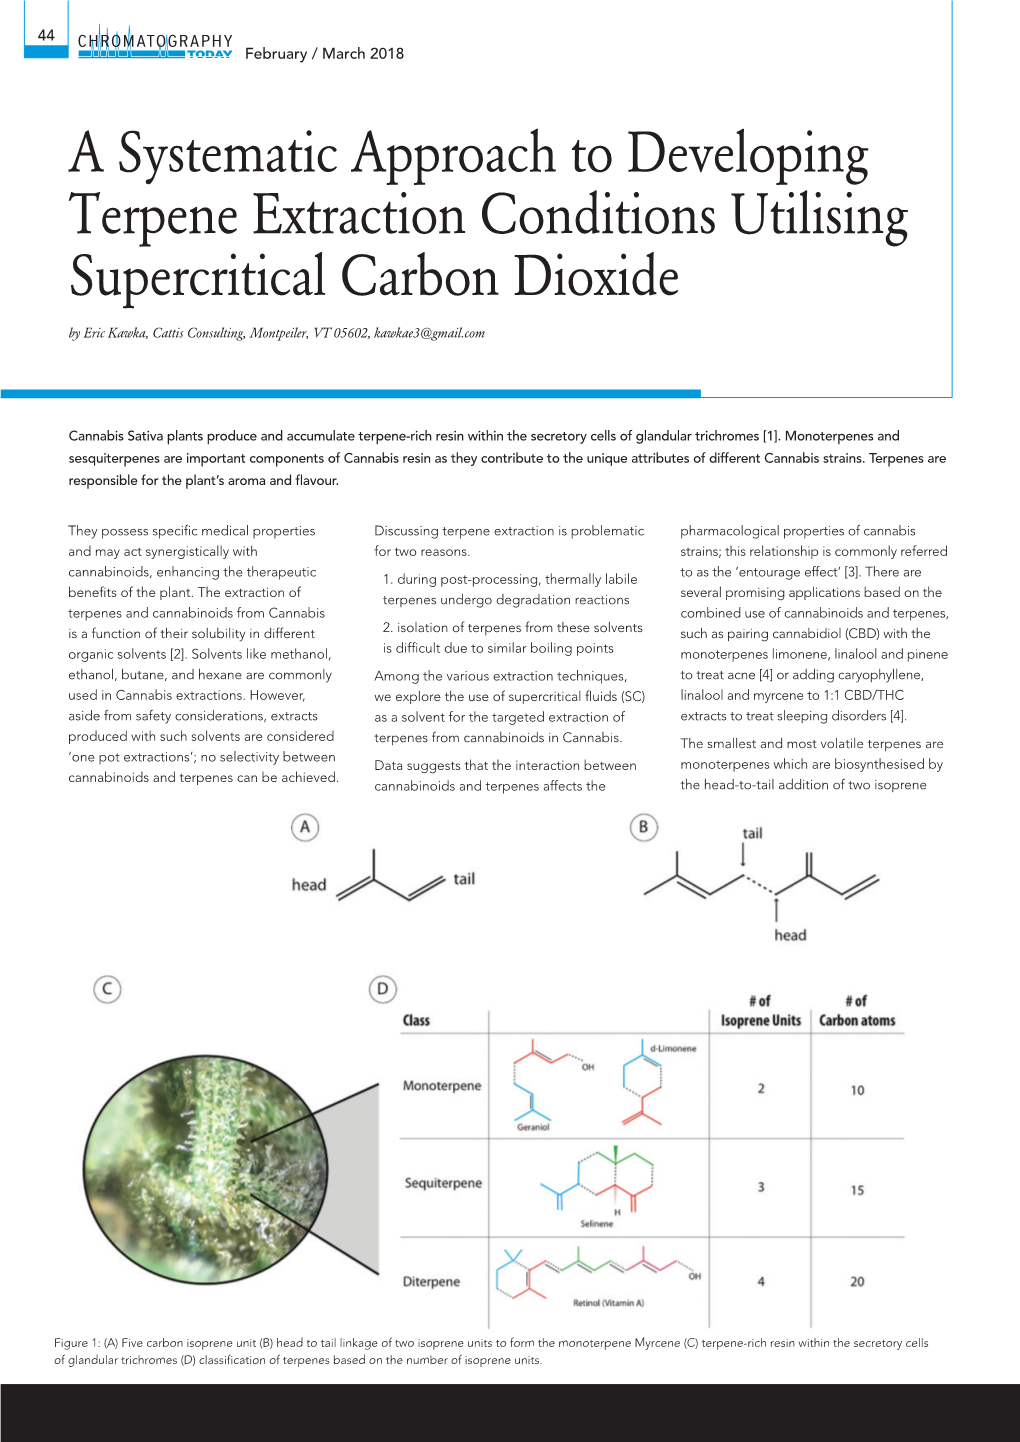 A Systematic Approach to Developing Terpene Extraction Conditions Utilising Supercritical Carbon Dioxide